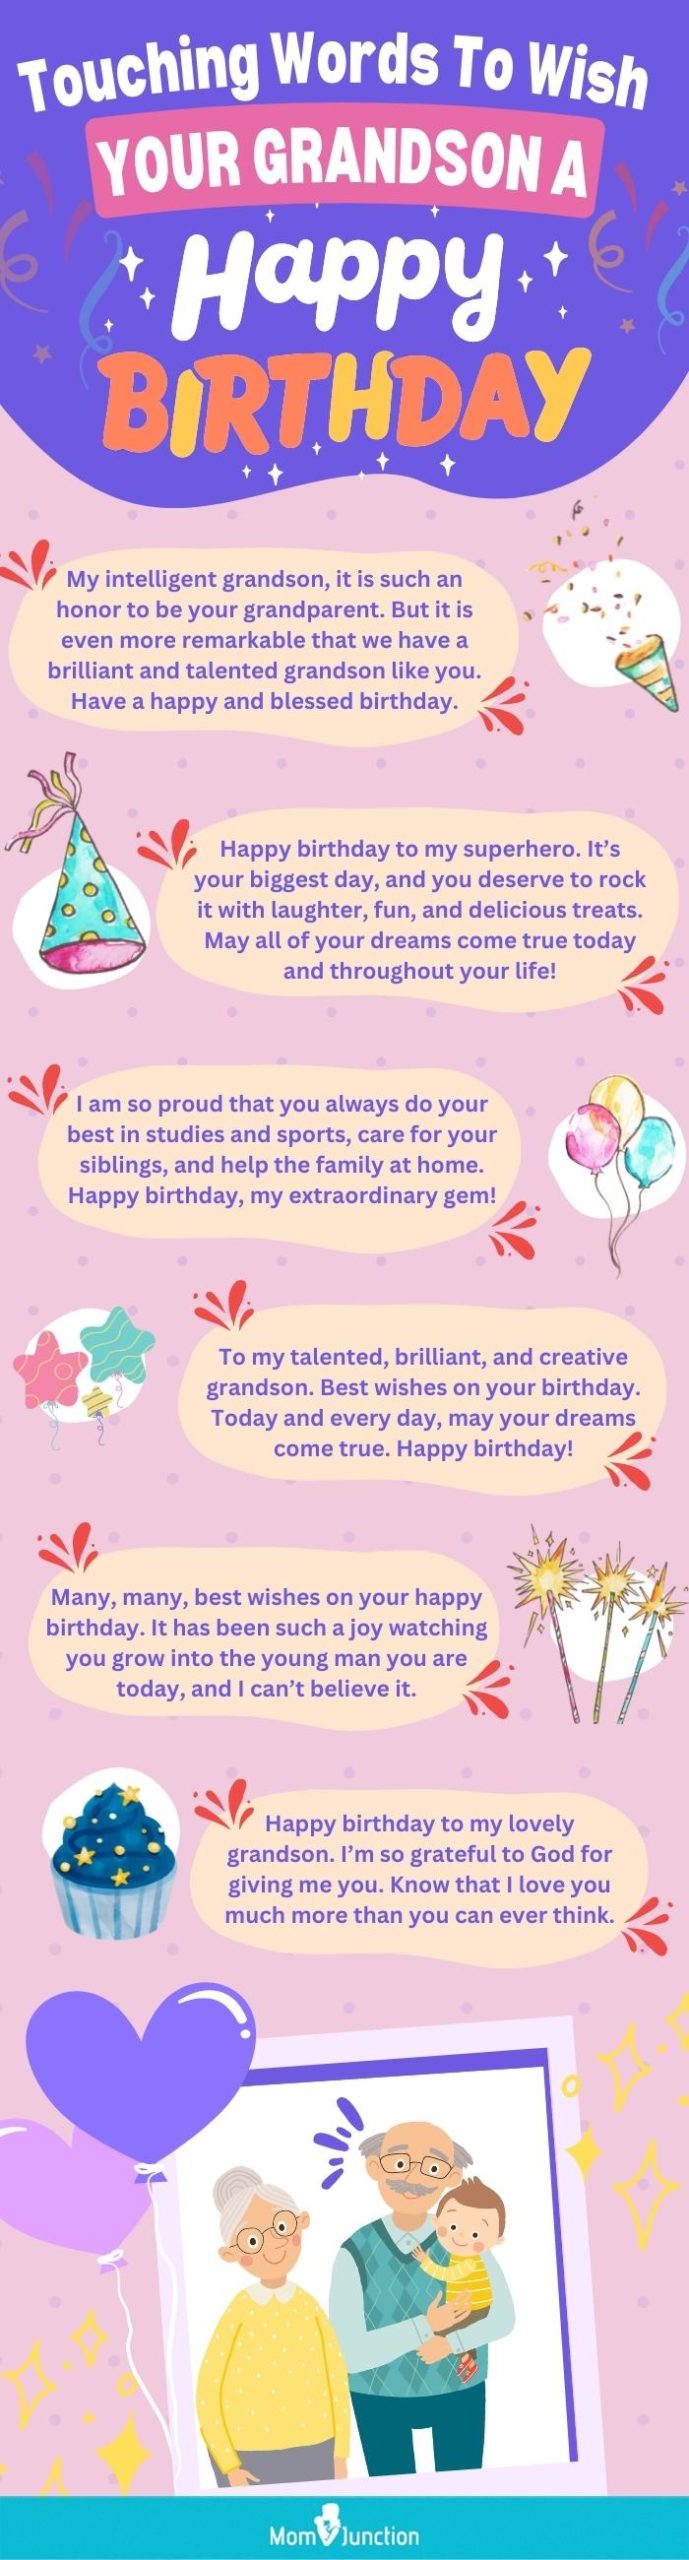 touching words to wish your grandson a happy birthday [infographic]